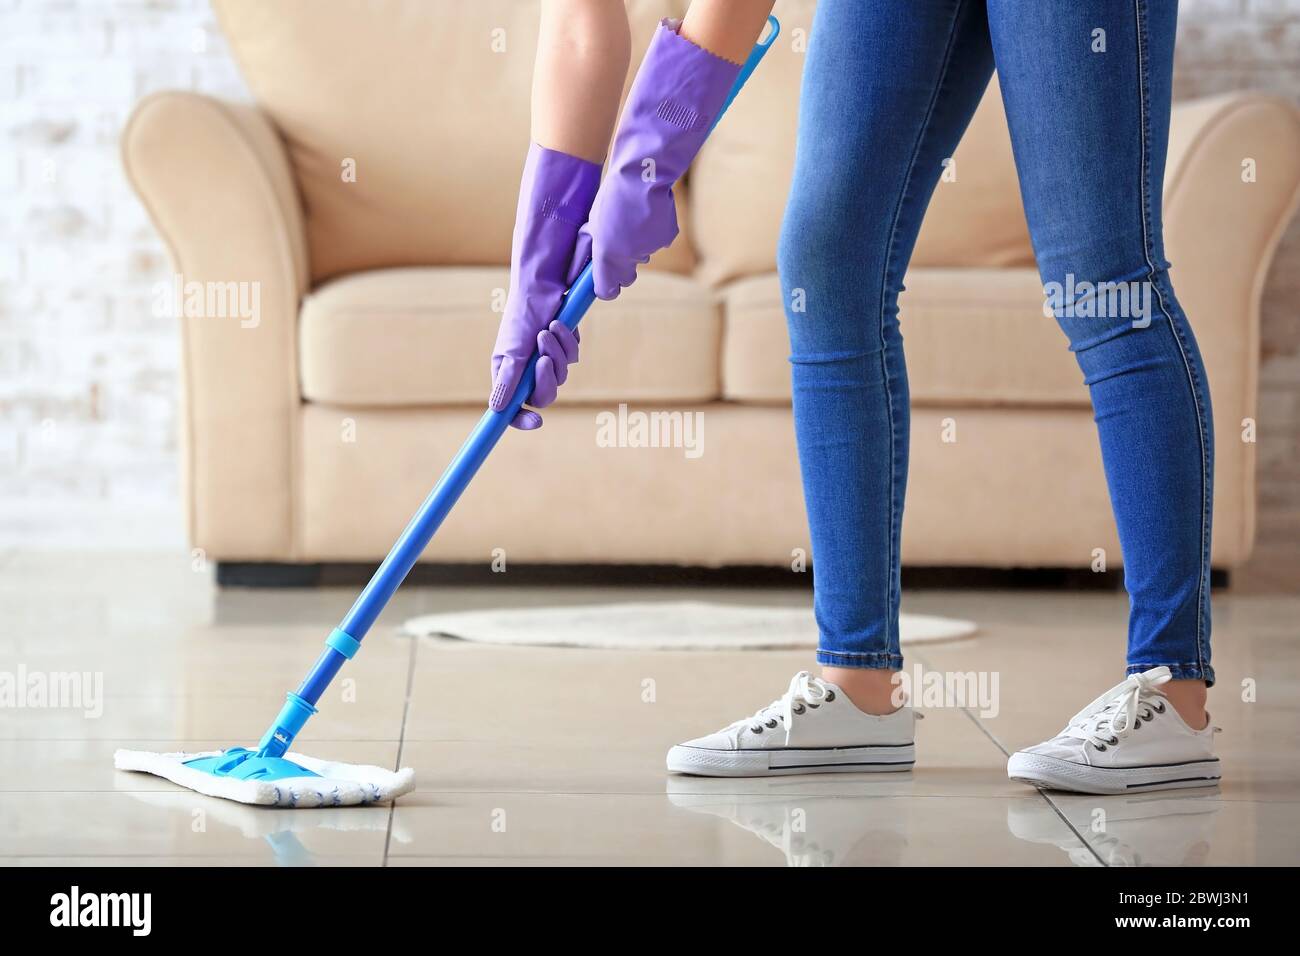 Woman mopping floor in room Stock Photo